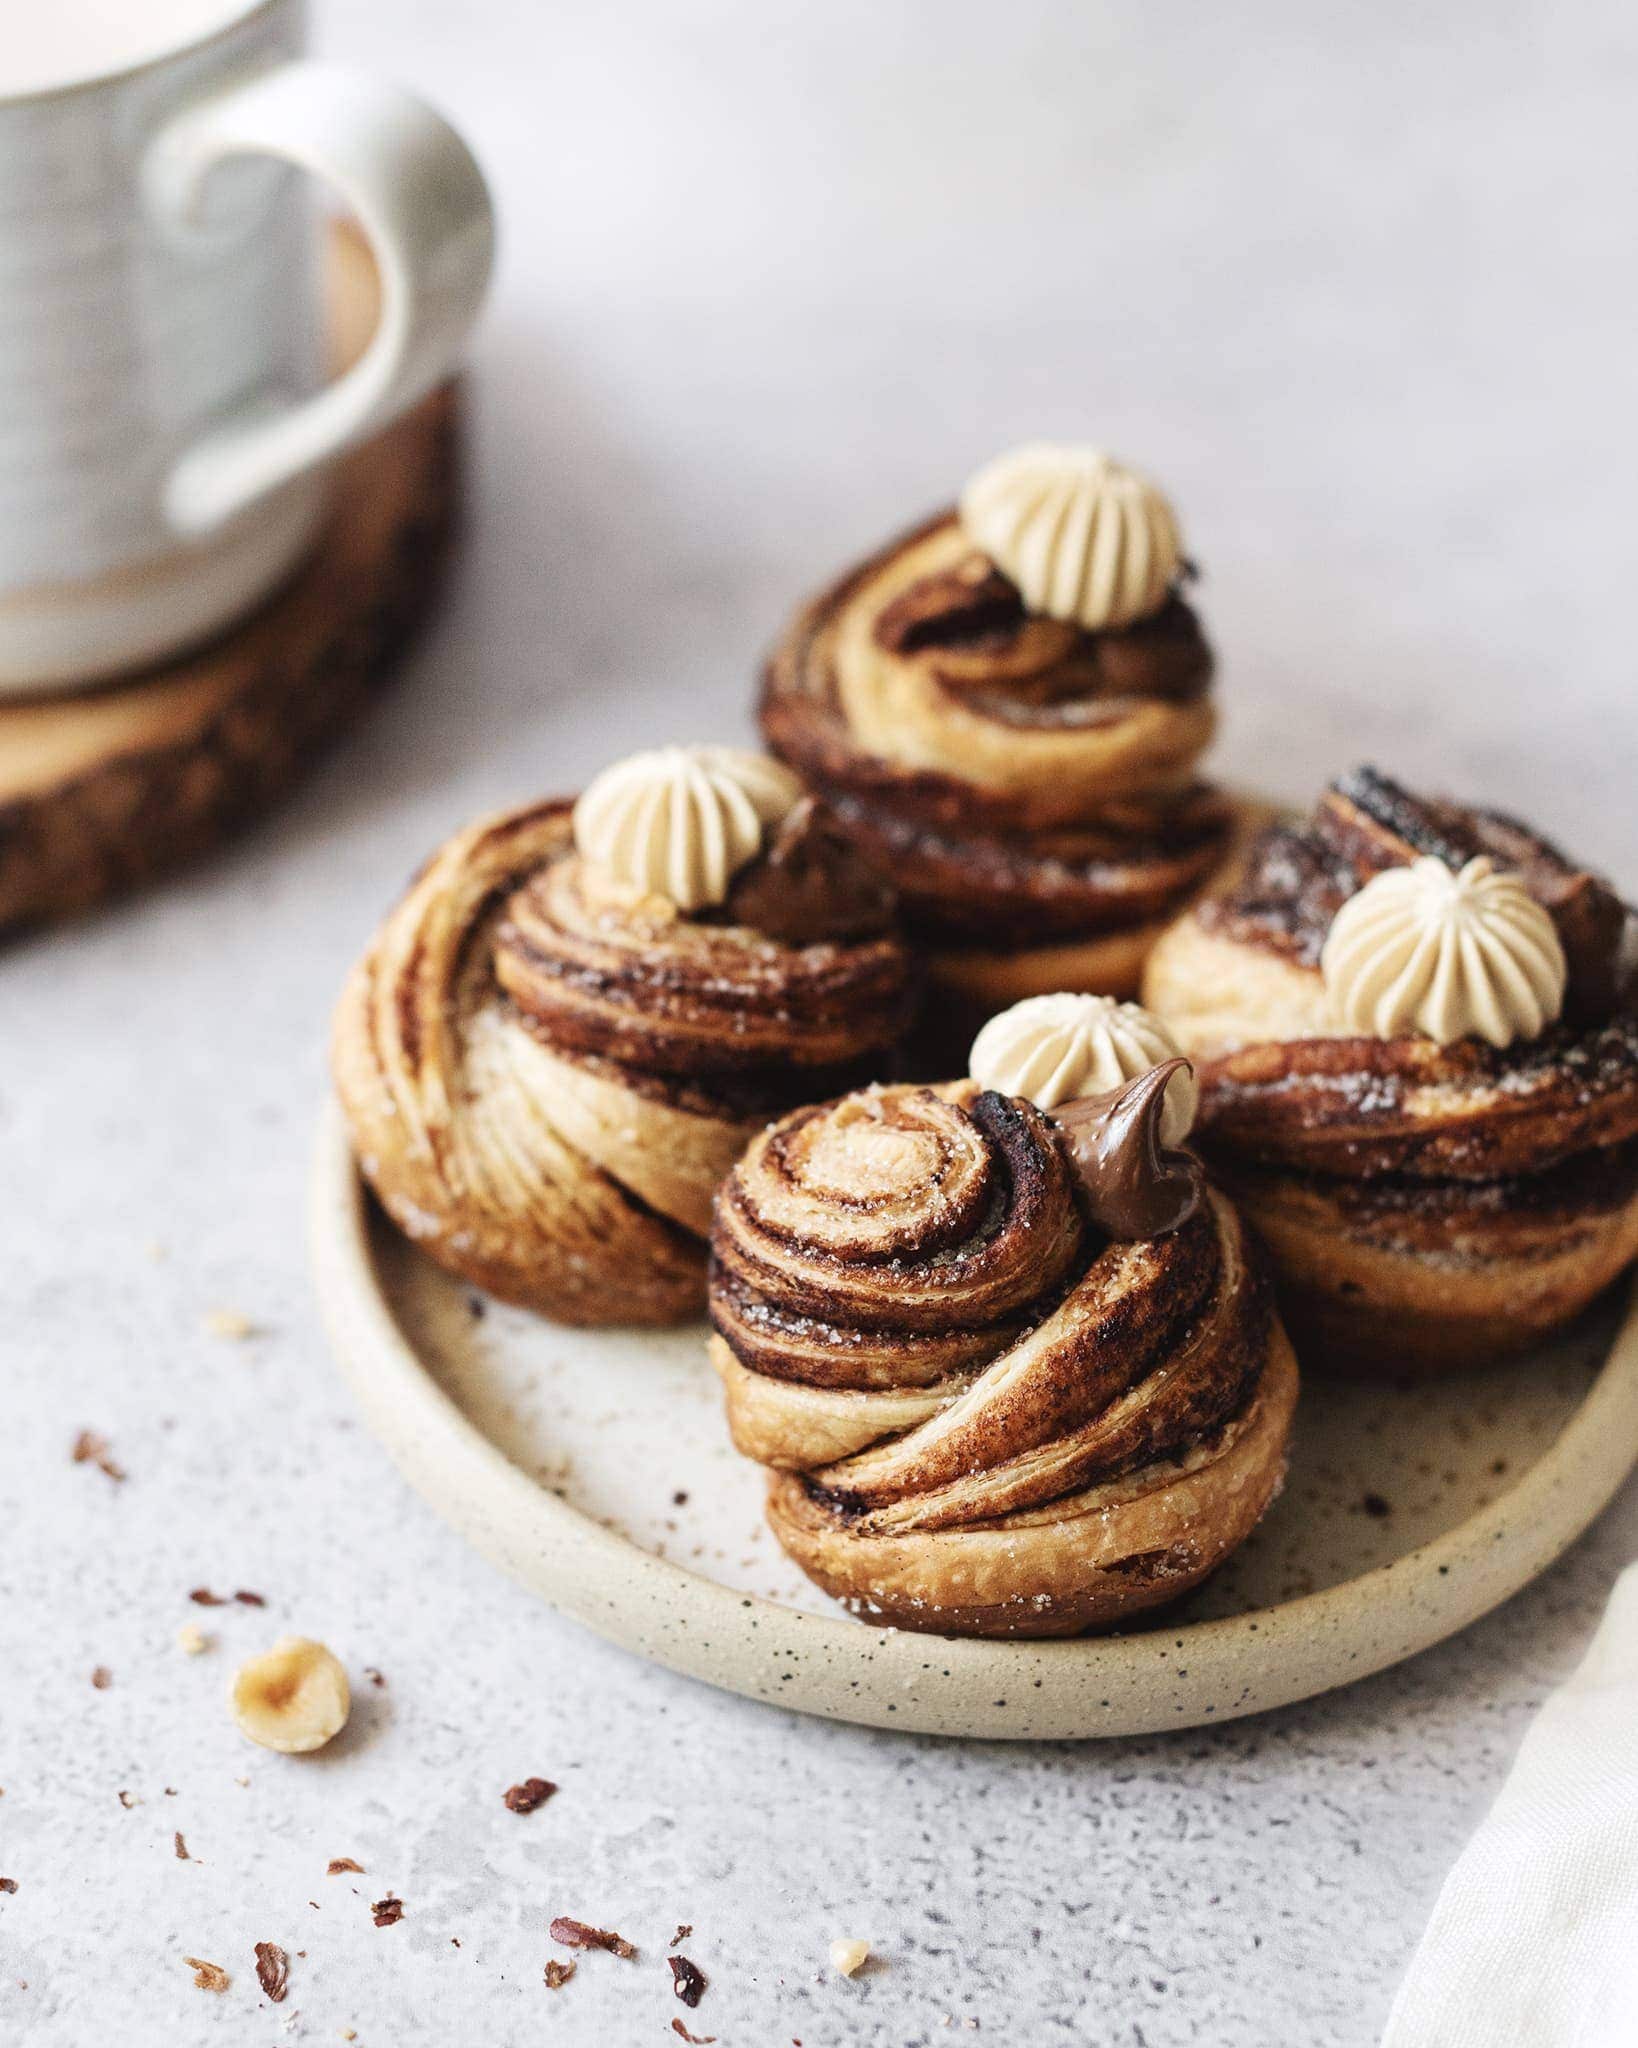 Plate of nutella cruffins with layers and twists of puff pastry